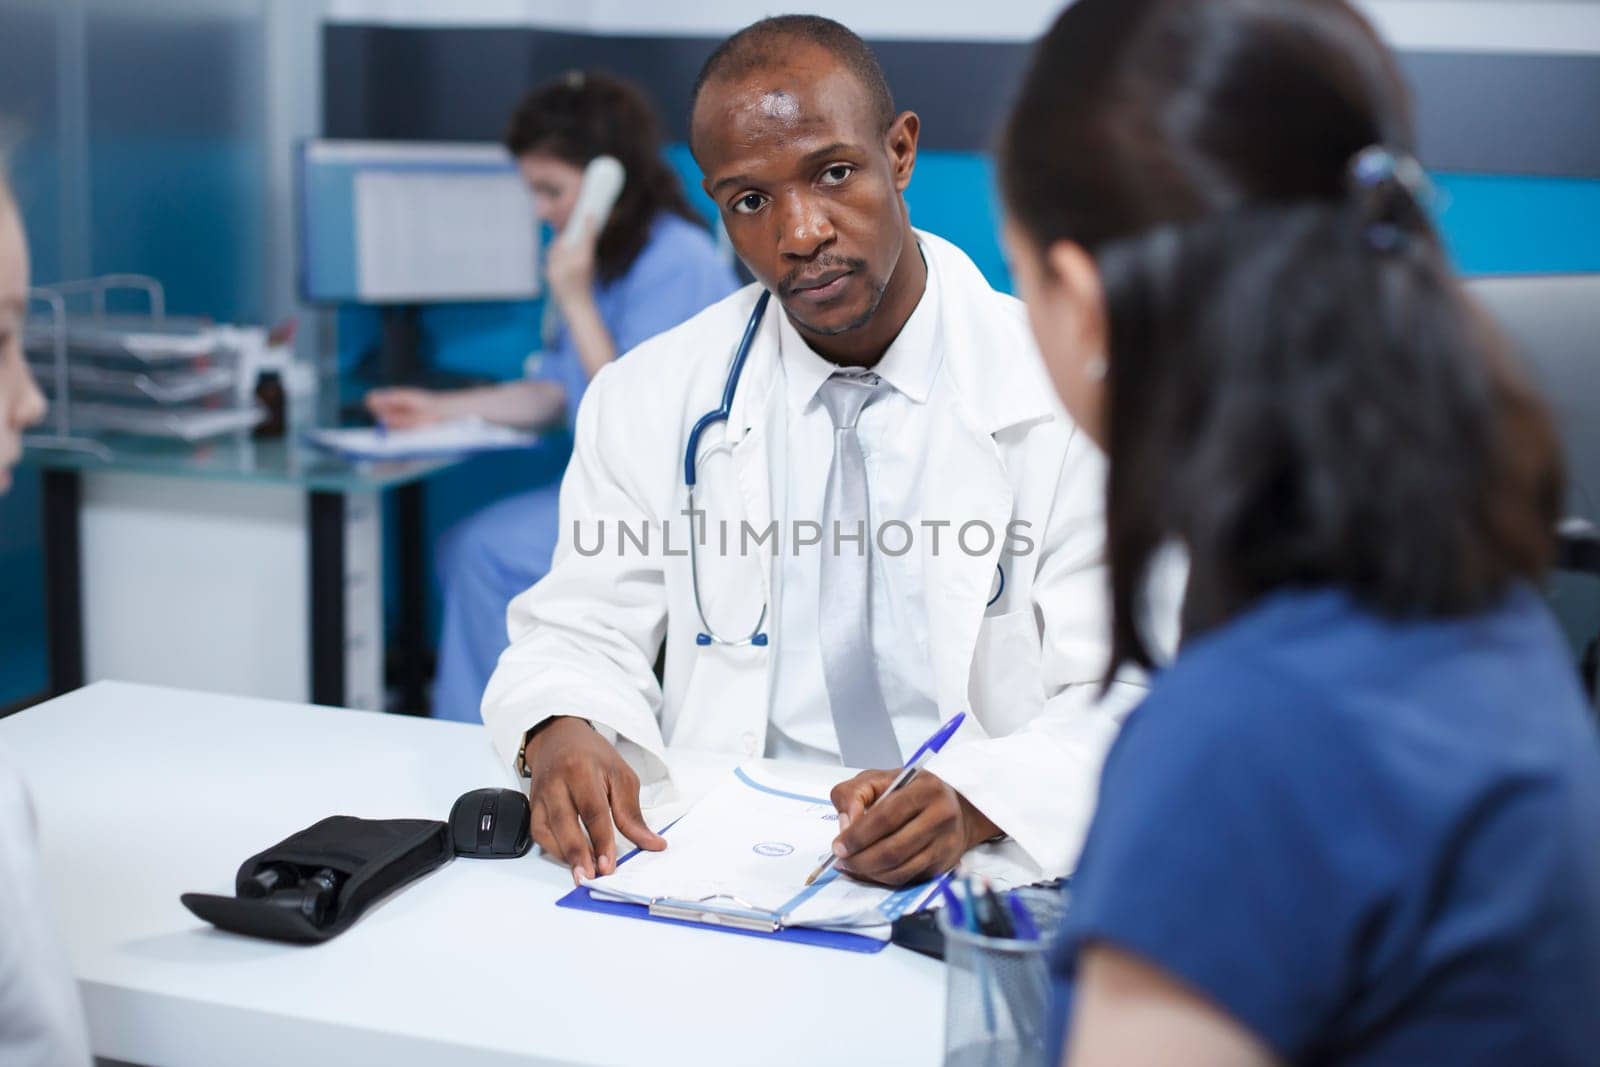 Doctor discusses health care with patient by DCStudio